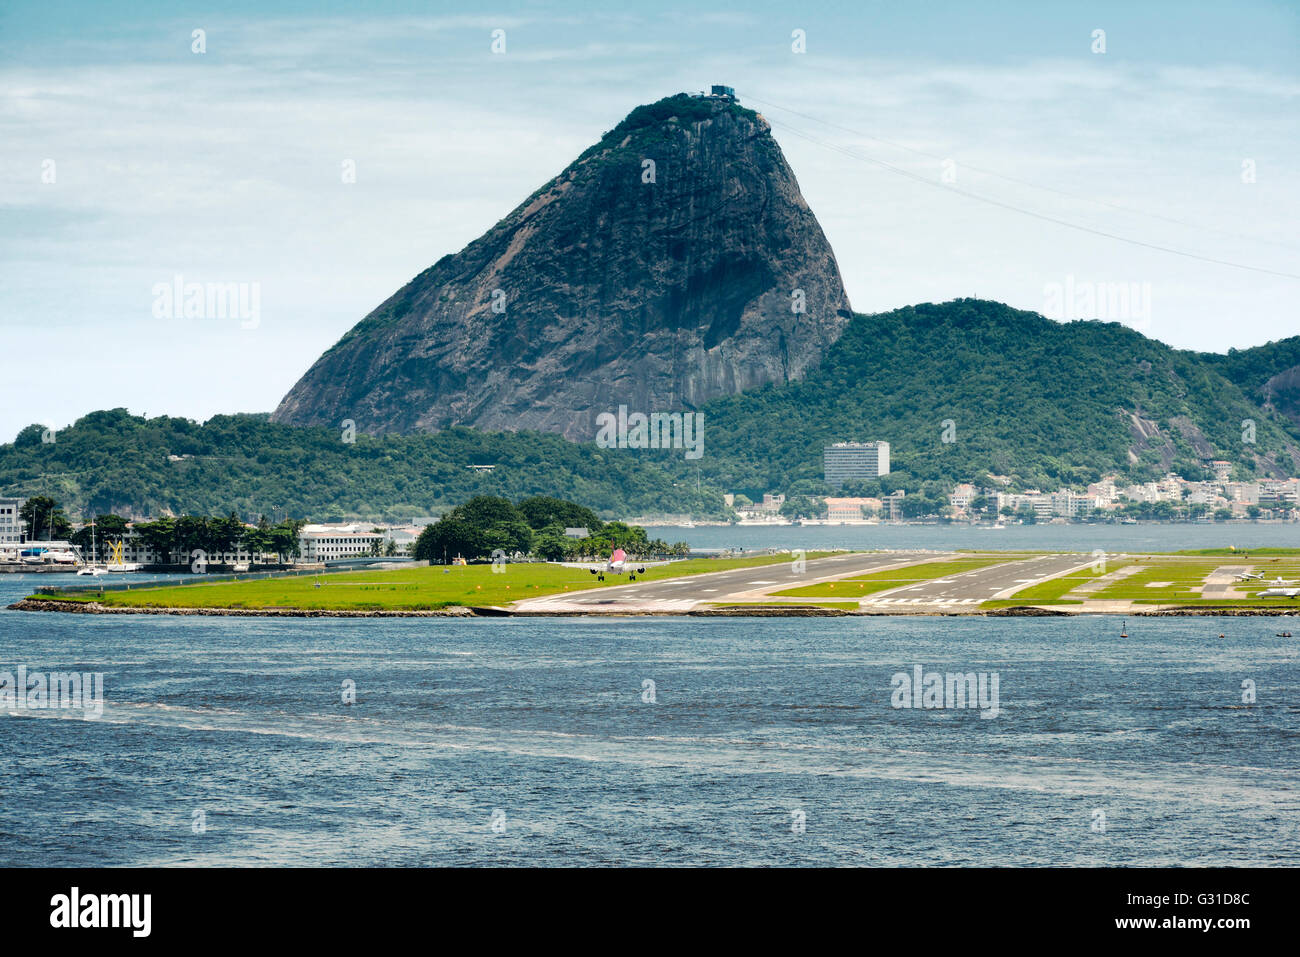 View Of A Passenger Airplane Landing At The Rio De Janeiro Airport With The City At The Background, Brazil Stock Photo